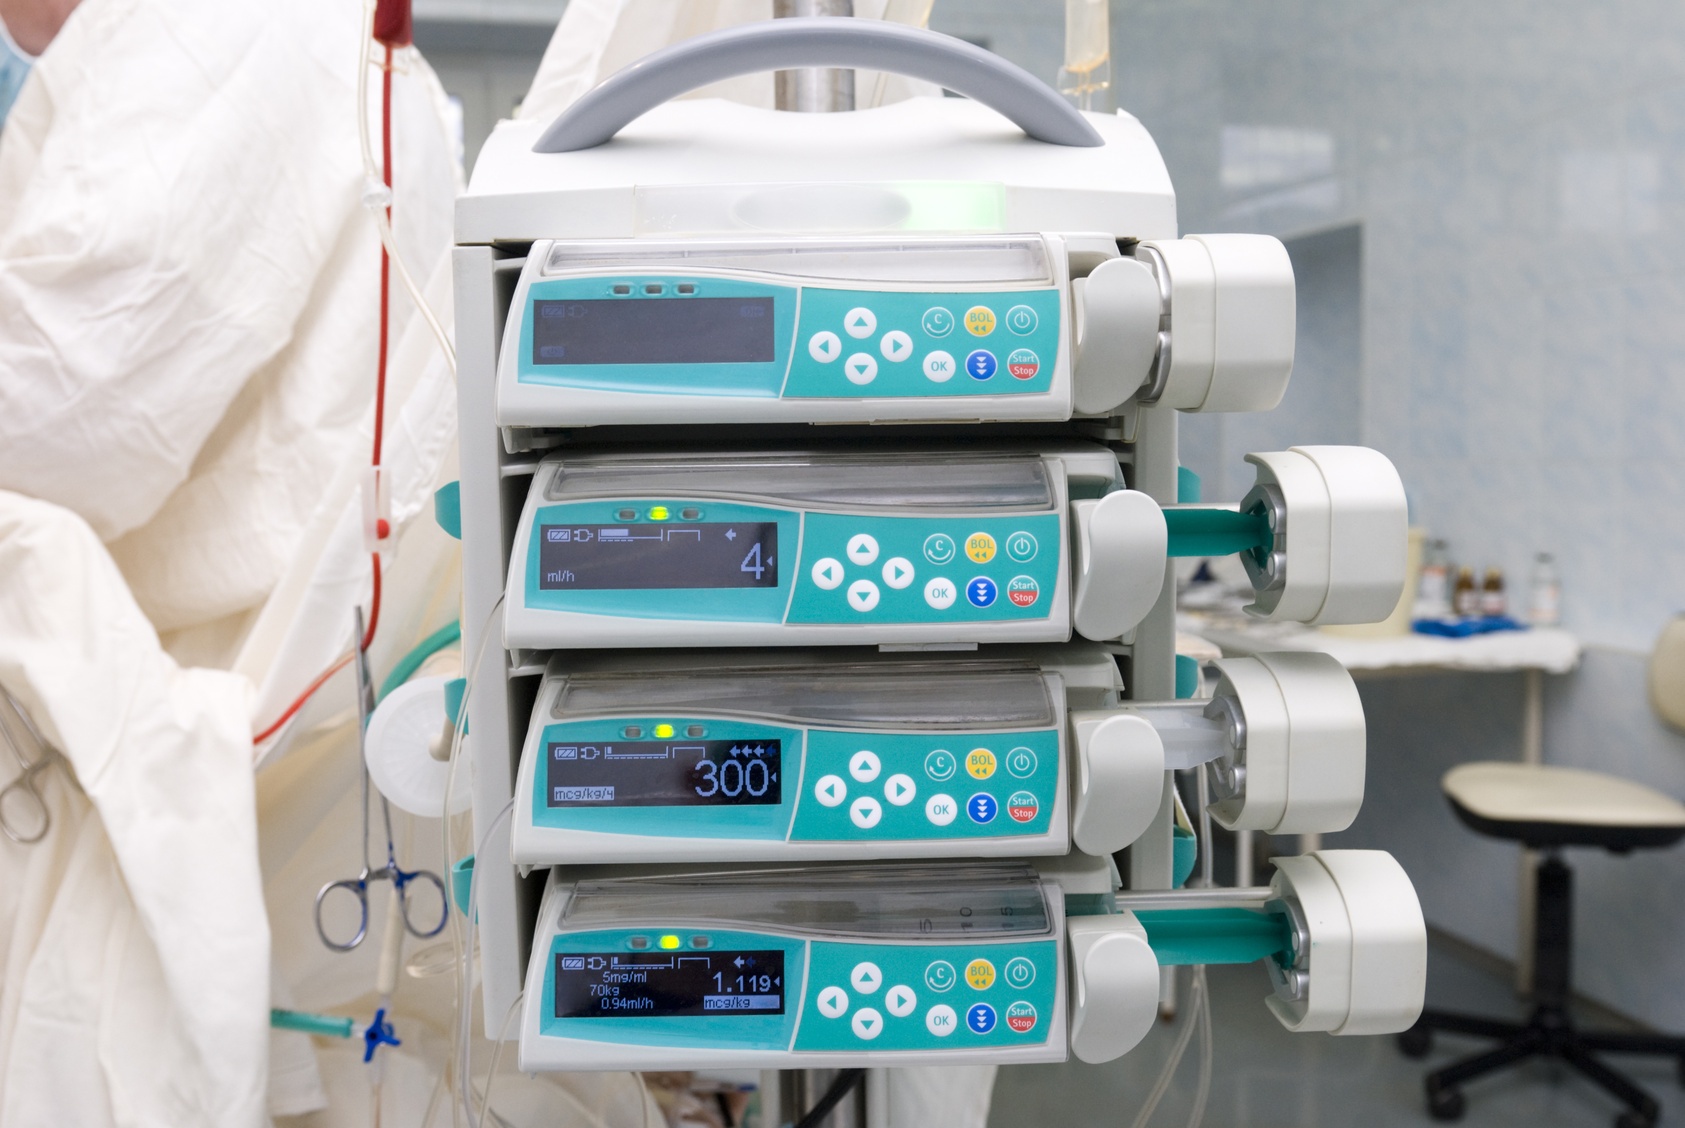 The FDA investigated Infusion pump failures with GrammaTech CodeSonar